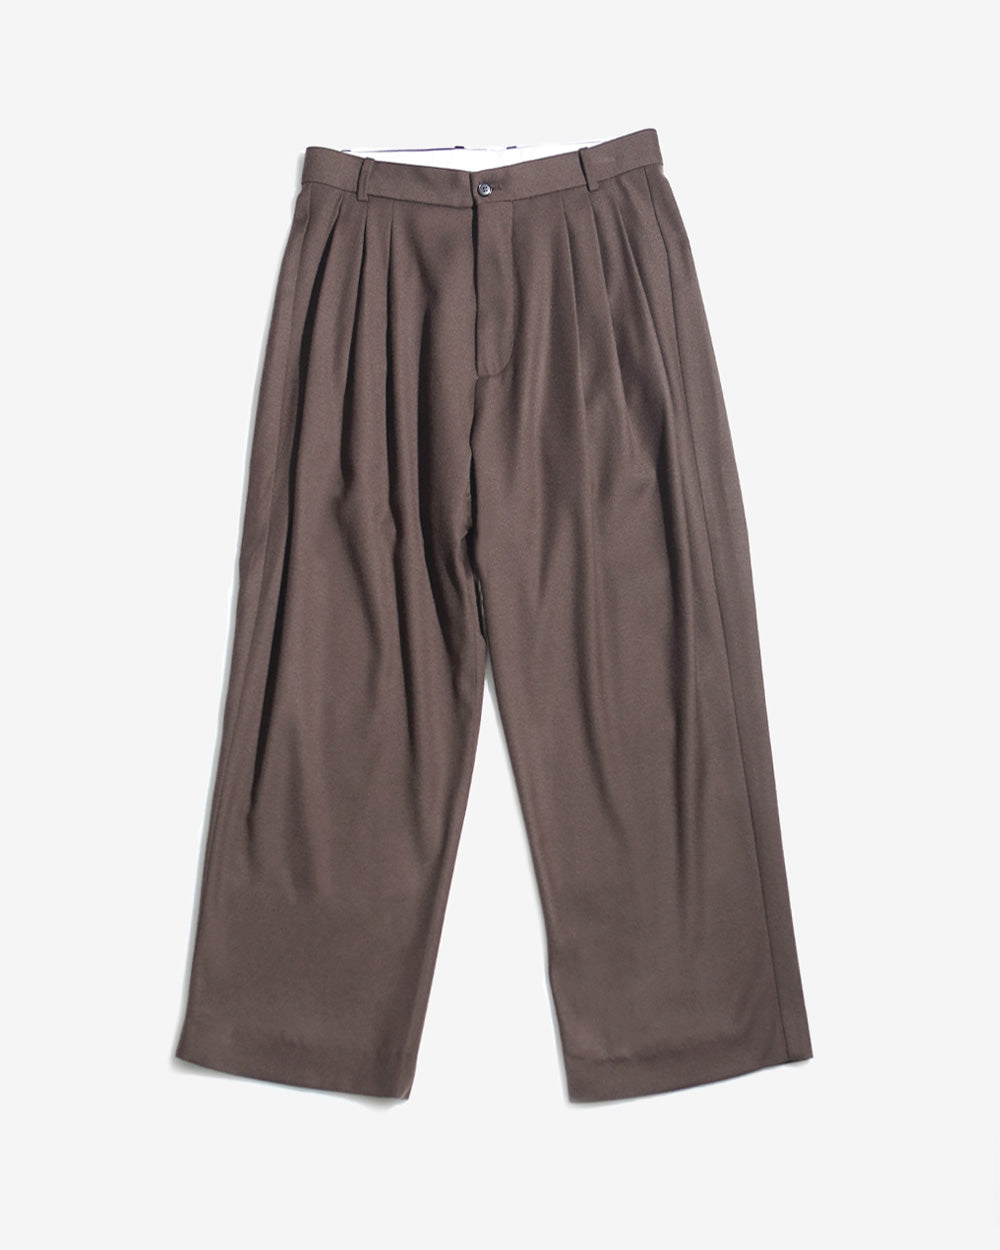 HED MAYNER / 6 Pleat Pant Chocolate Brown Chobro - Road Sign